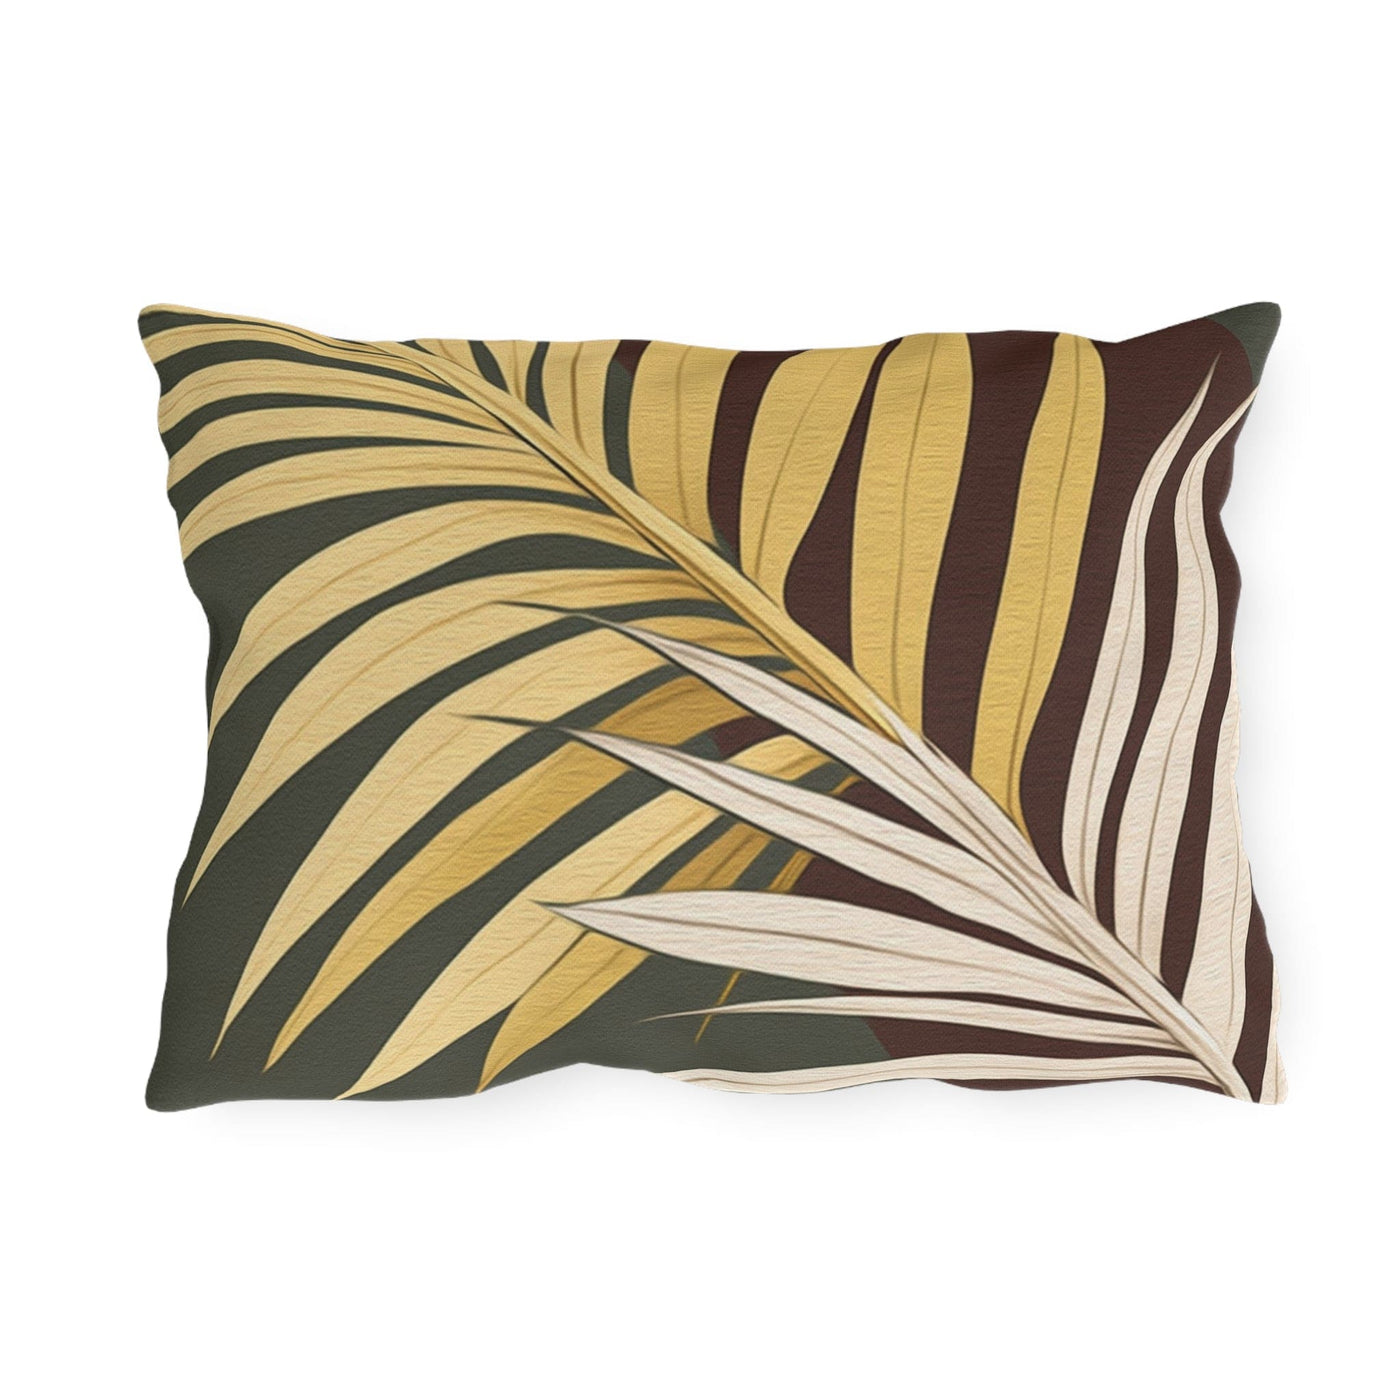 Decorative Outdoor Pillows With Zipper - Set Of 2 Palm Tree Leaves Green